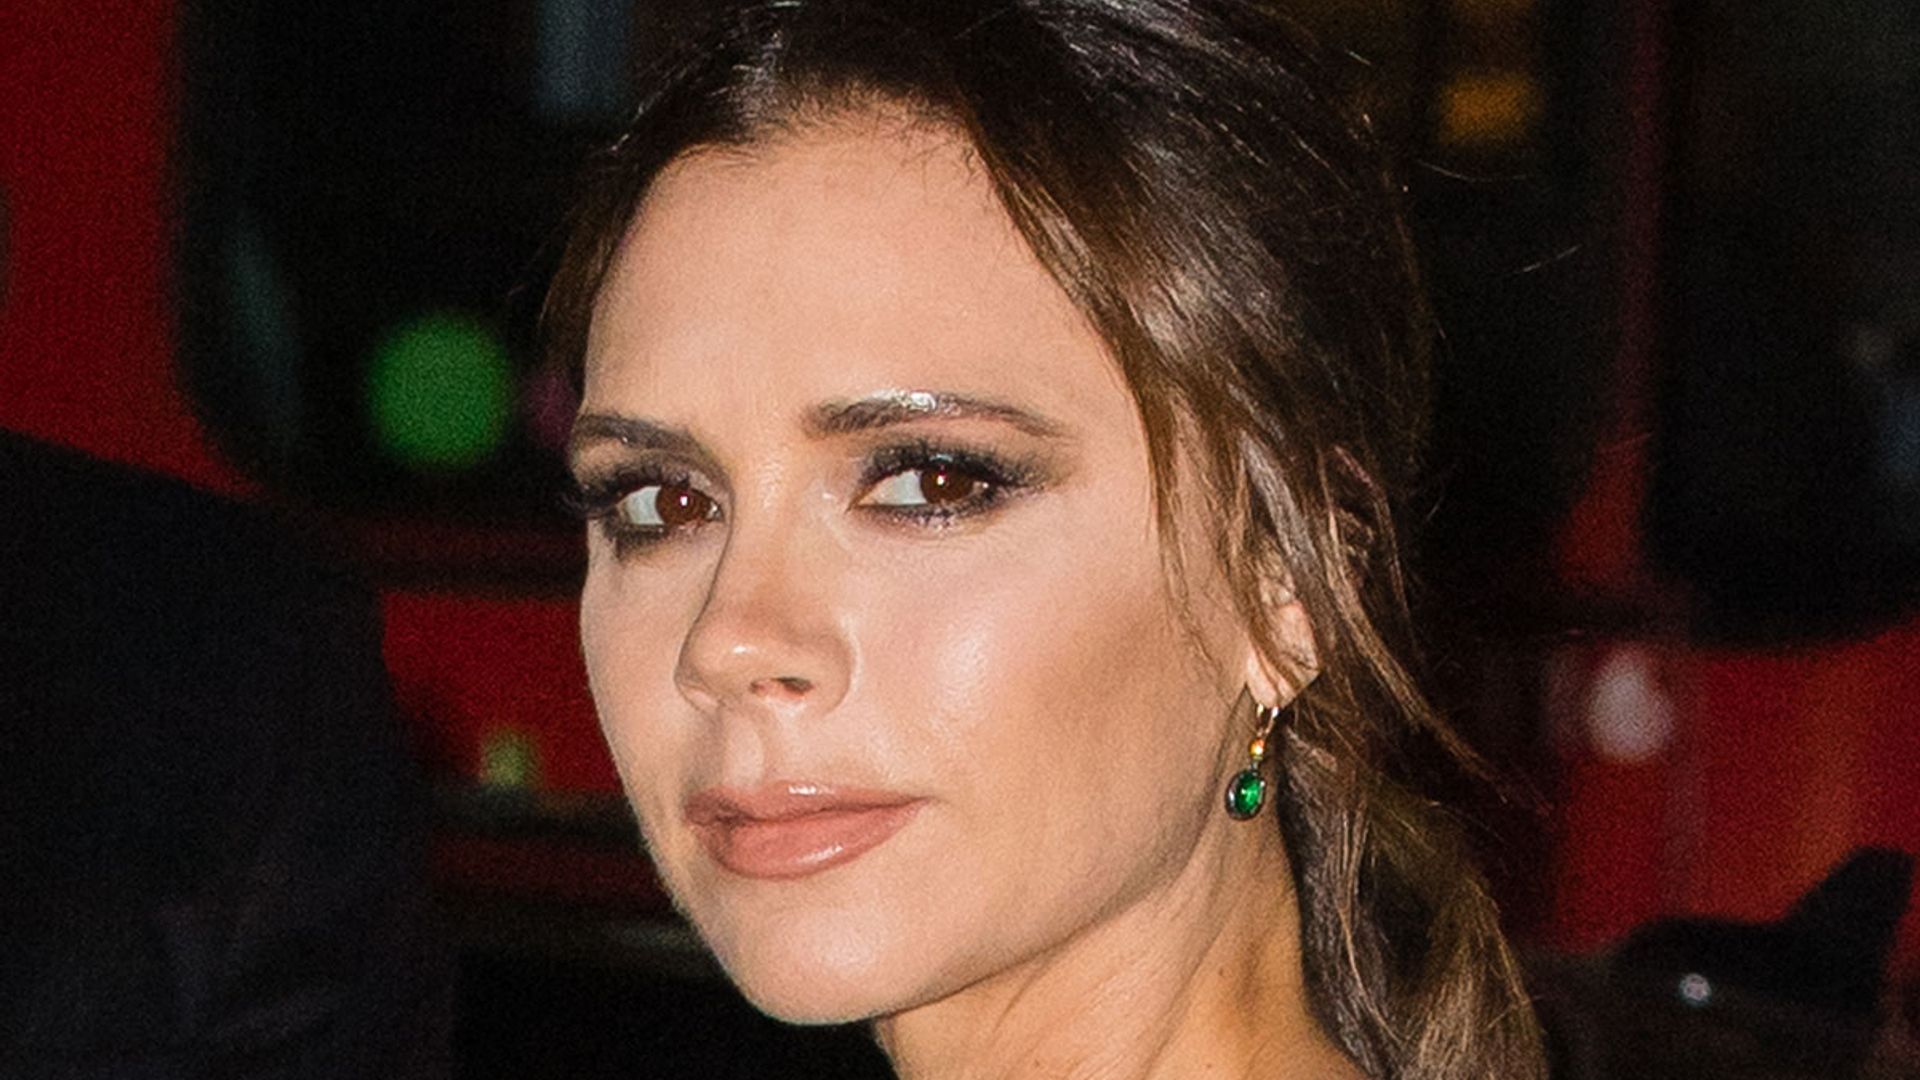 Victoria Beckham swears by THIS £7 beauty product | HELLO!